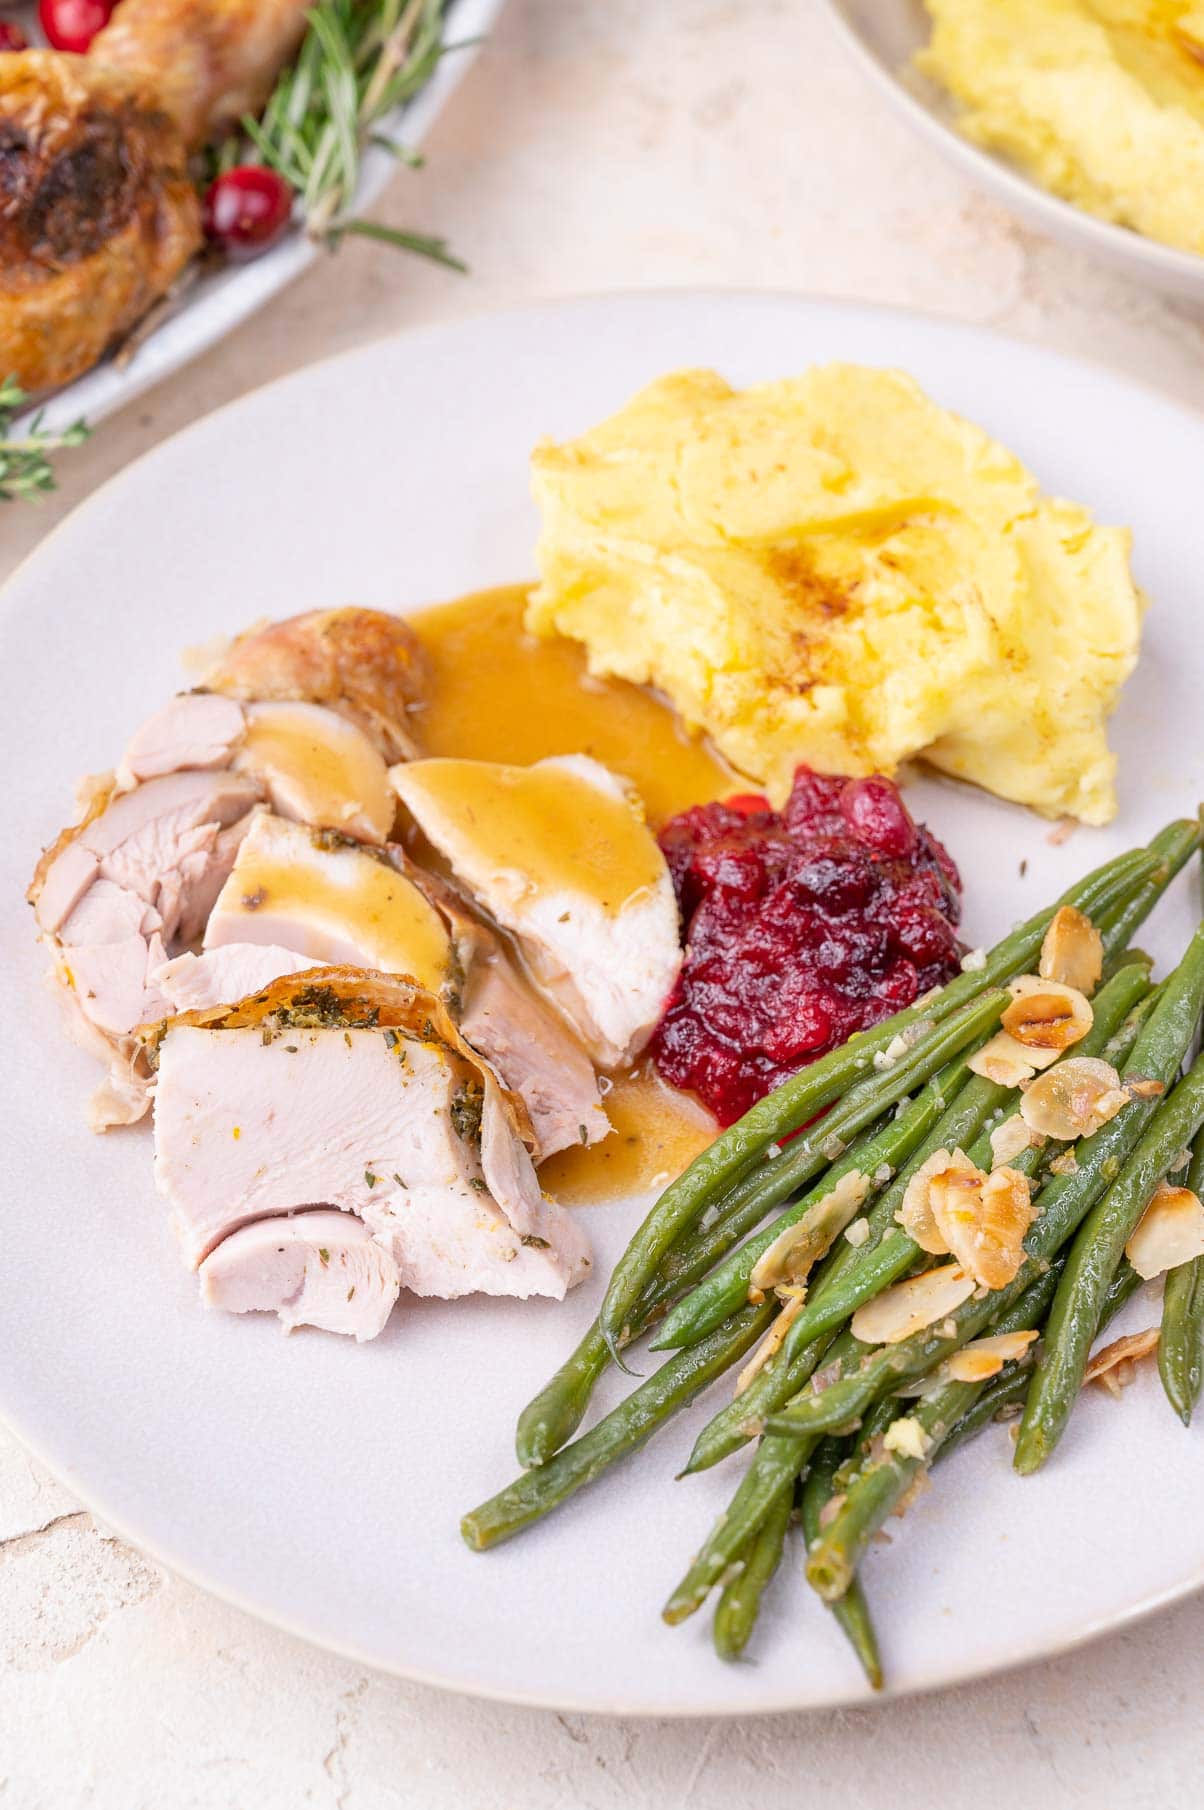 Roast turkey, mashed potatoes, gravy, cranberry sauce, and green beans on a beige plate.